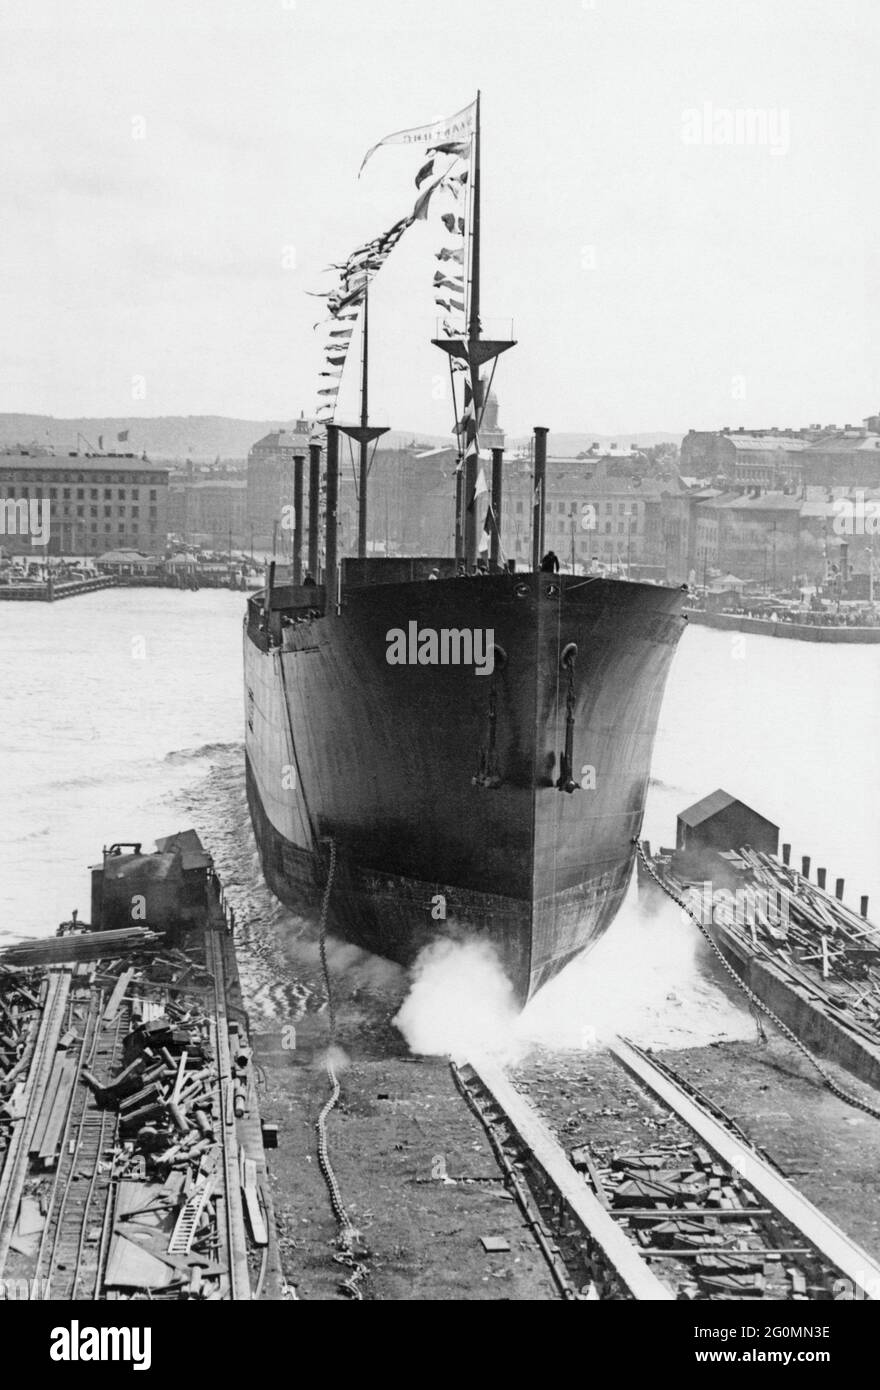 Shipyard in the 1920s. In the harbor of Gothenburg and the shipping wharf of Götaverken a ship is being launched. A majestic photograph of the ship sliding into the water. It is the Swedish East India Companys new ship Shantung that is being launched on June 7 1929. The company have a long history of trading with East India and used their own ships. Stock Photo